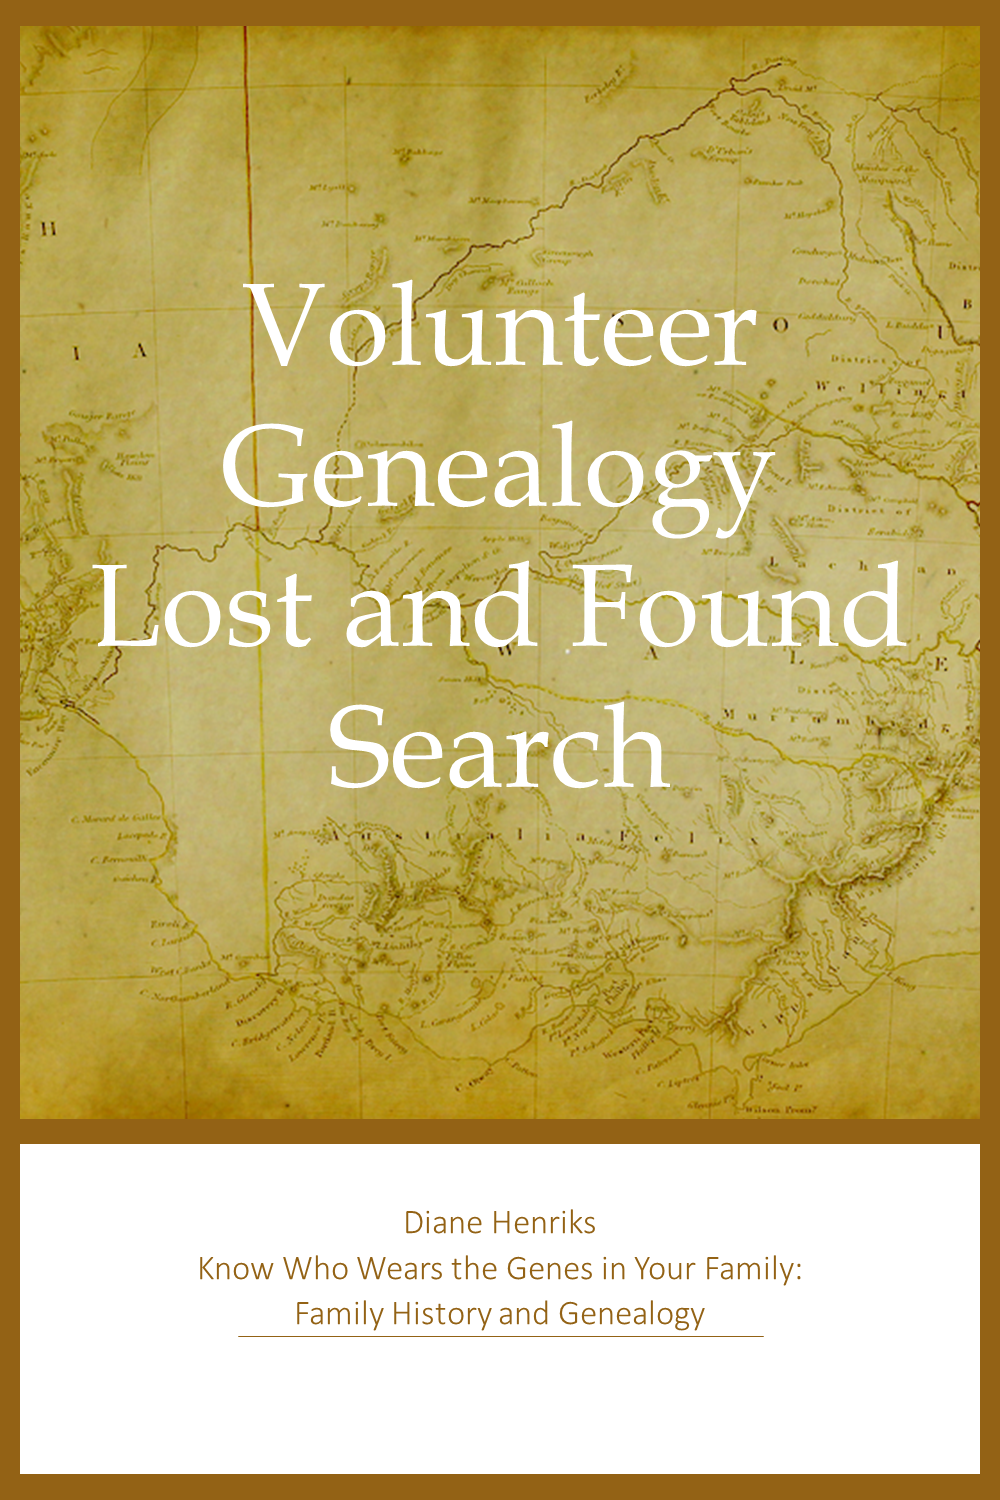 Genealogy Lost and Found Search by Diane Henriks at Know Who Wears the Genes in Your Family